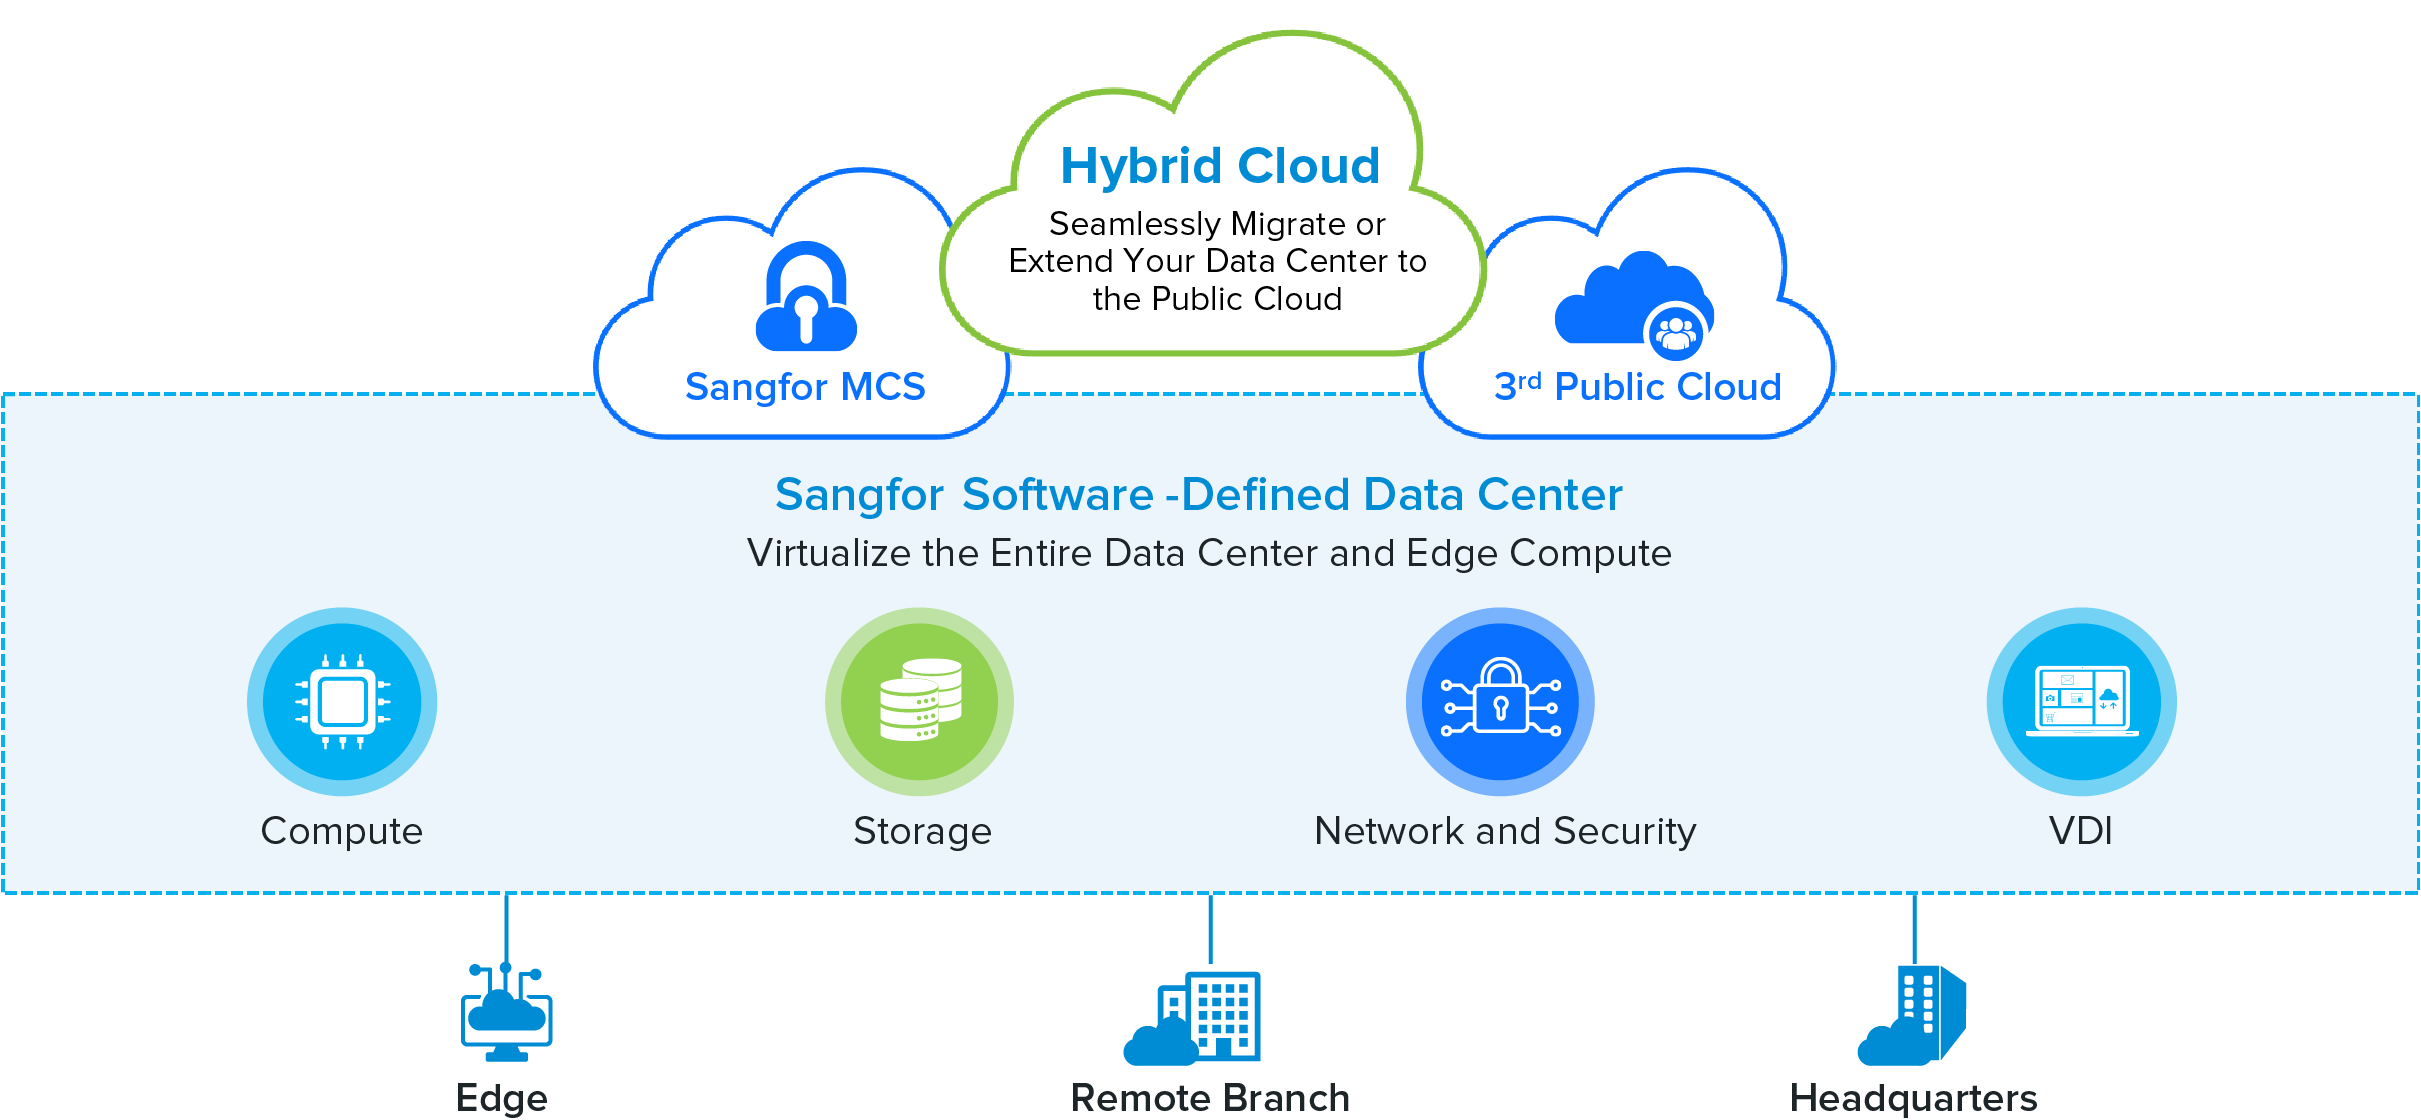 Secure and Smooth Move to Hybrid Cloud